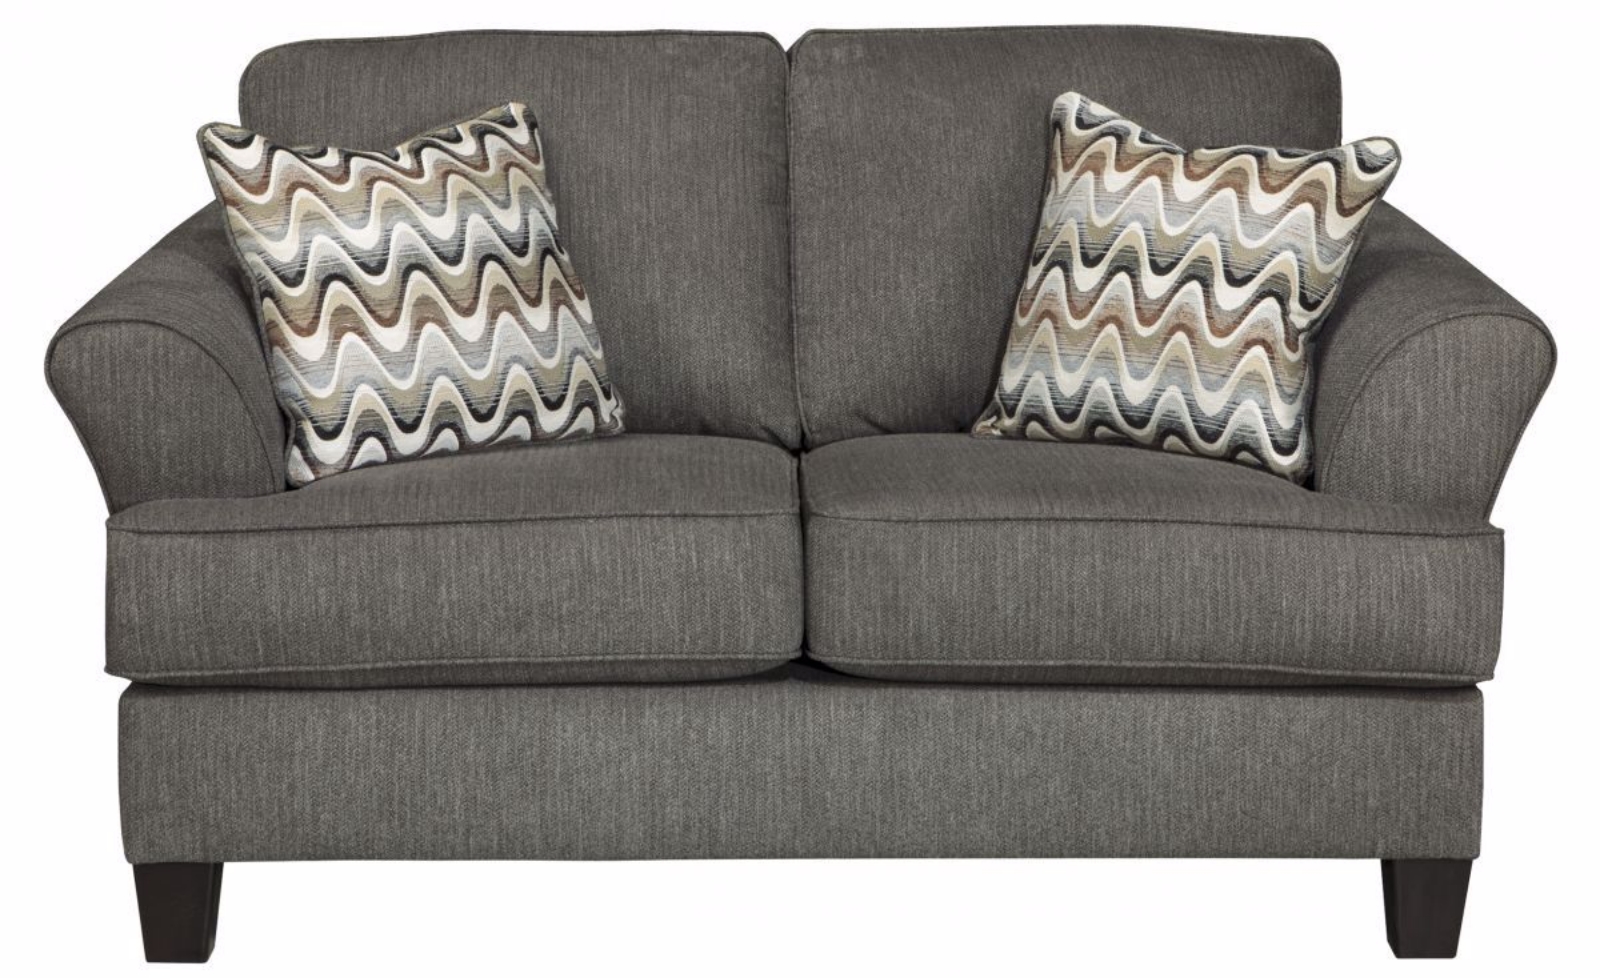 Picture of Gayler Loveseat